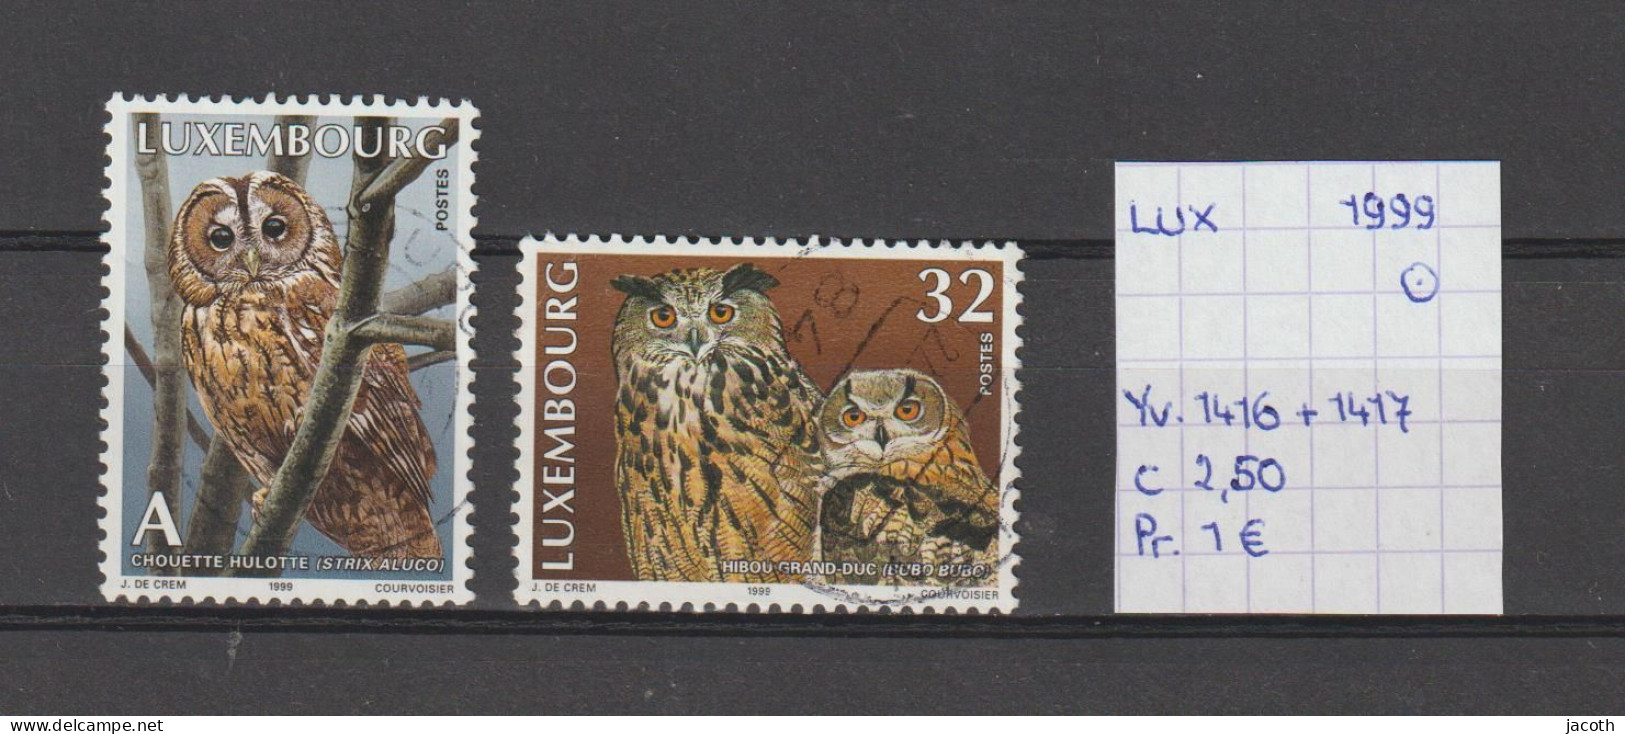 (TJ) Luxembourg 1999 - YT 1416 + 1417 (gest./obl./used) - Used Stamps